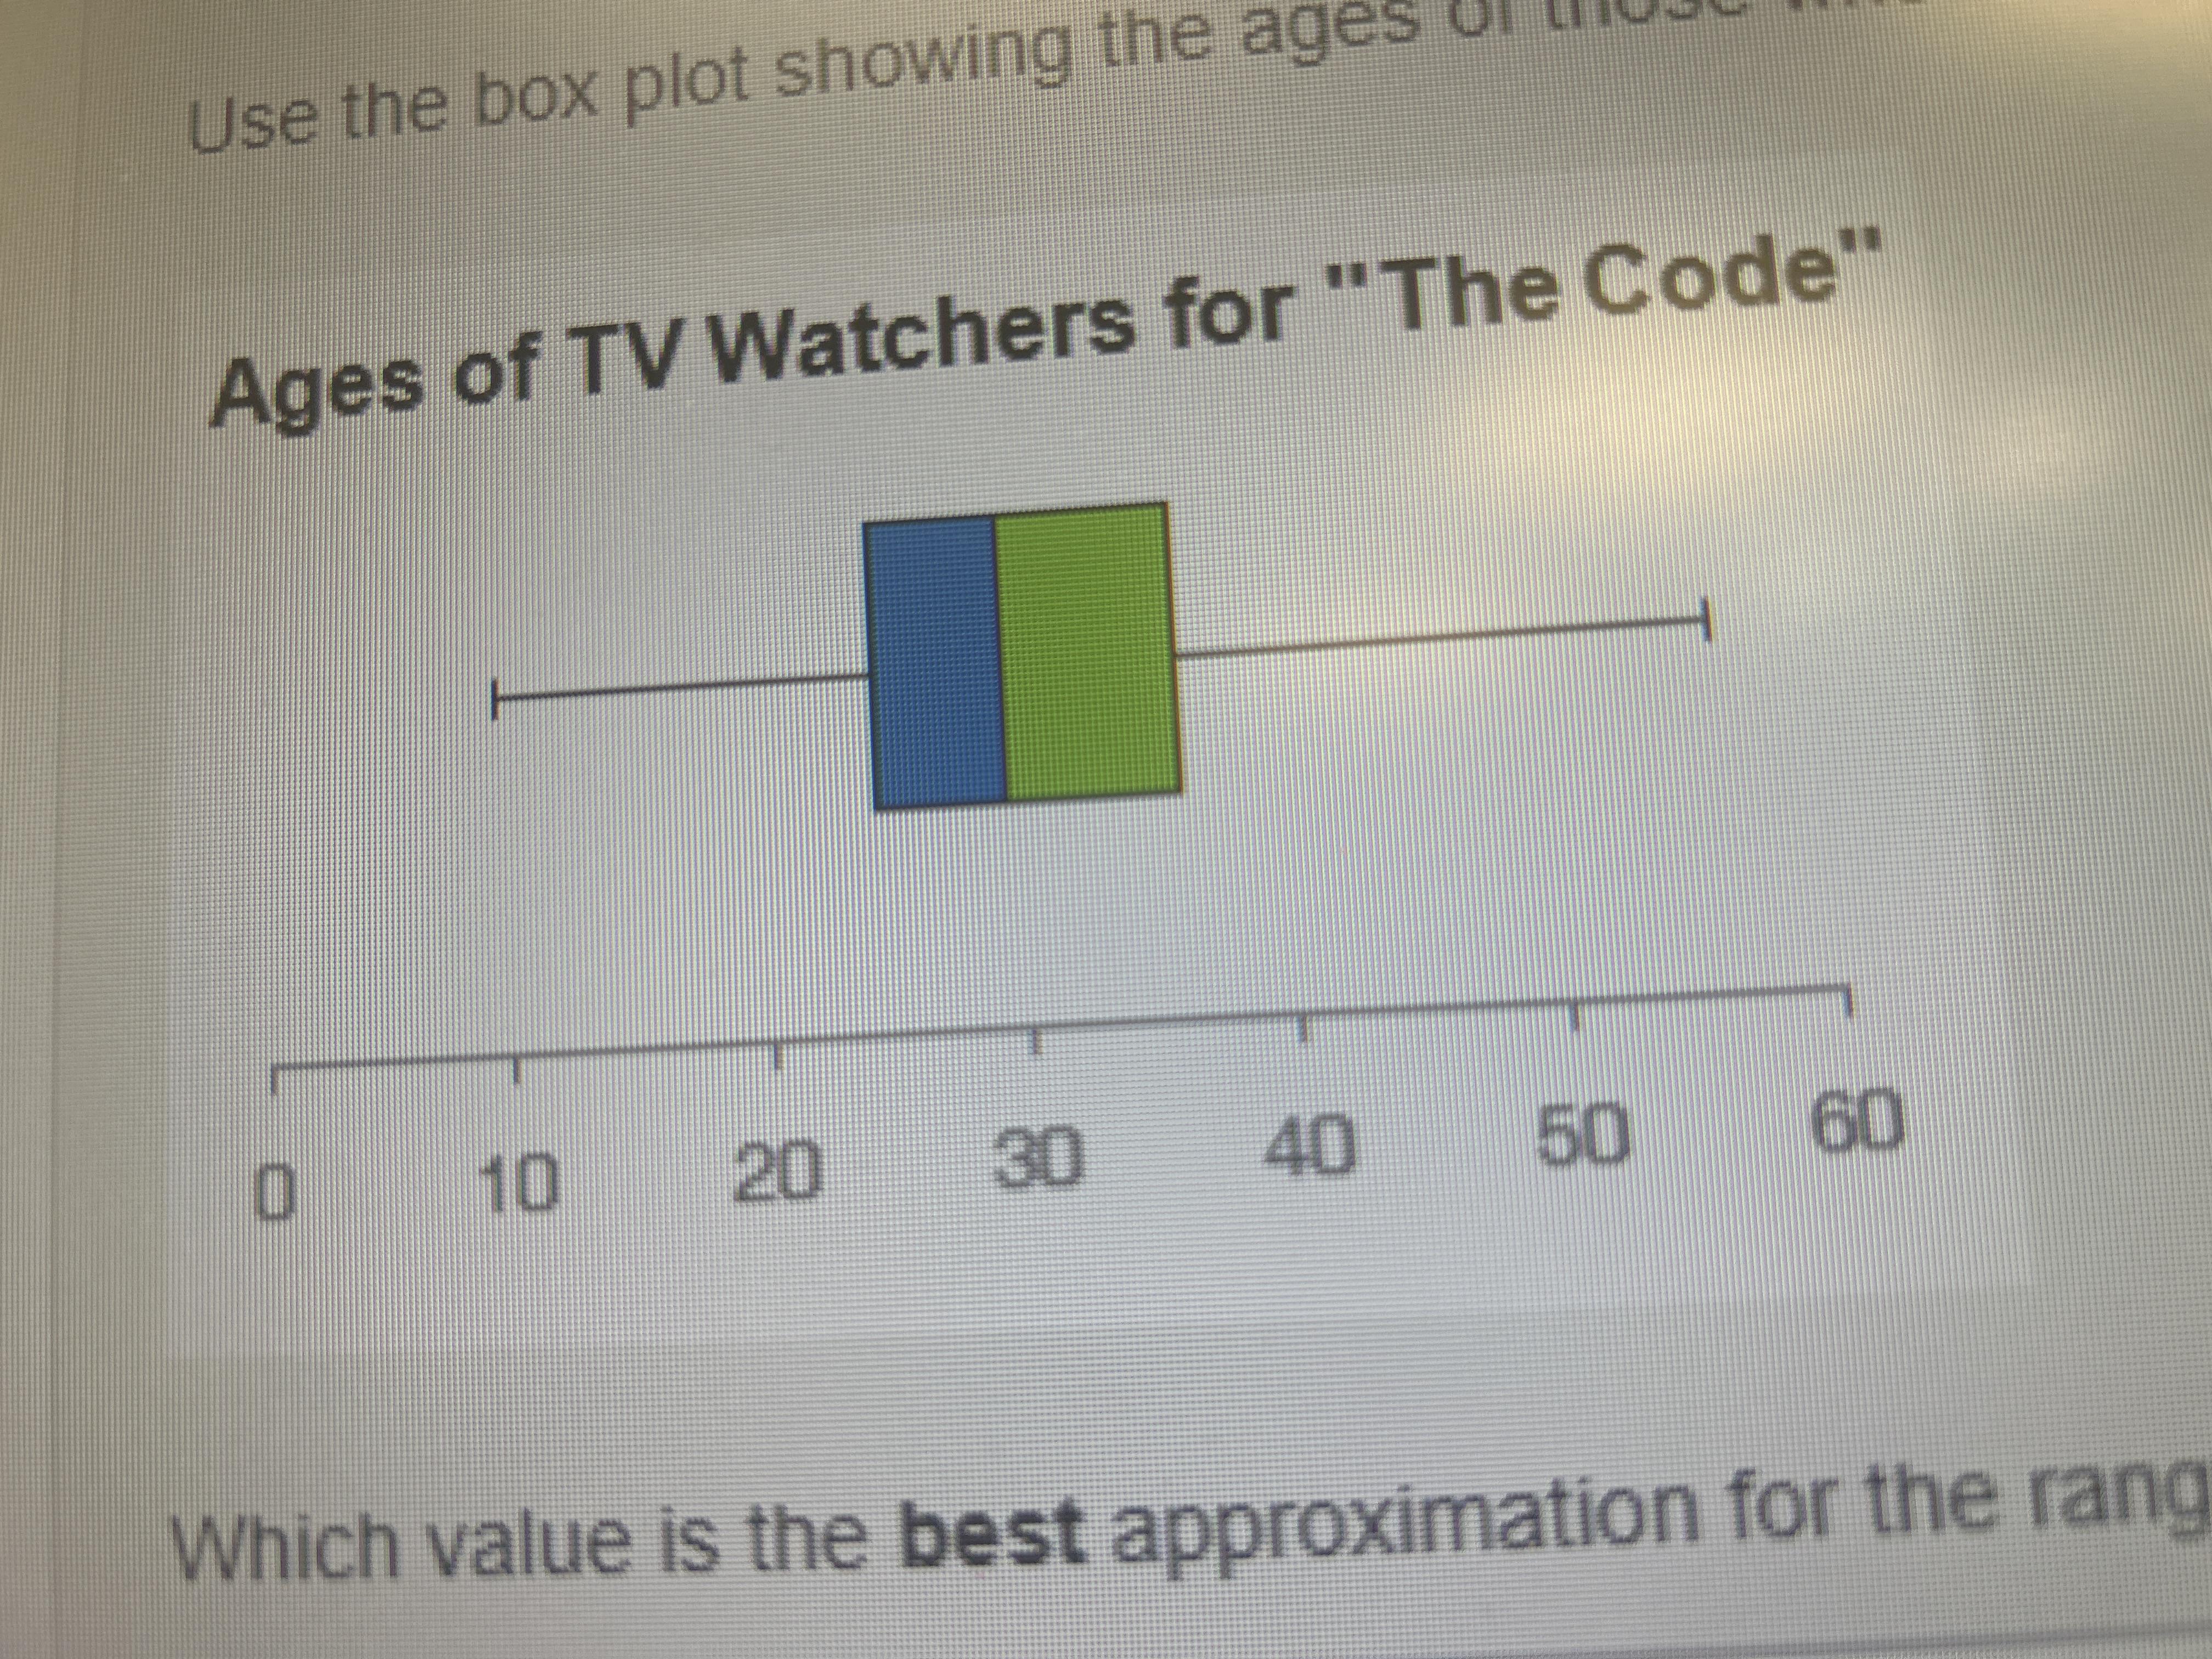 Use The Box Plot Showing The Ages Of Those Who Watch The Television Show 'The Code" To Answer The Question